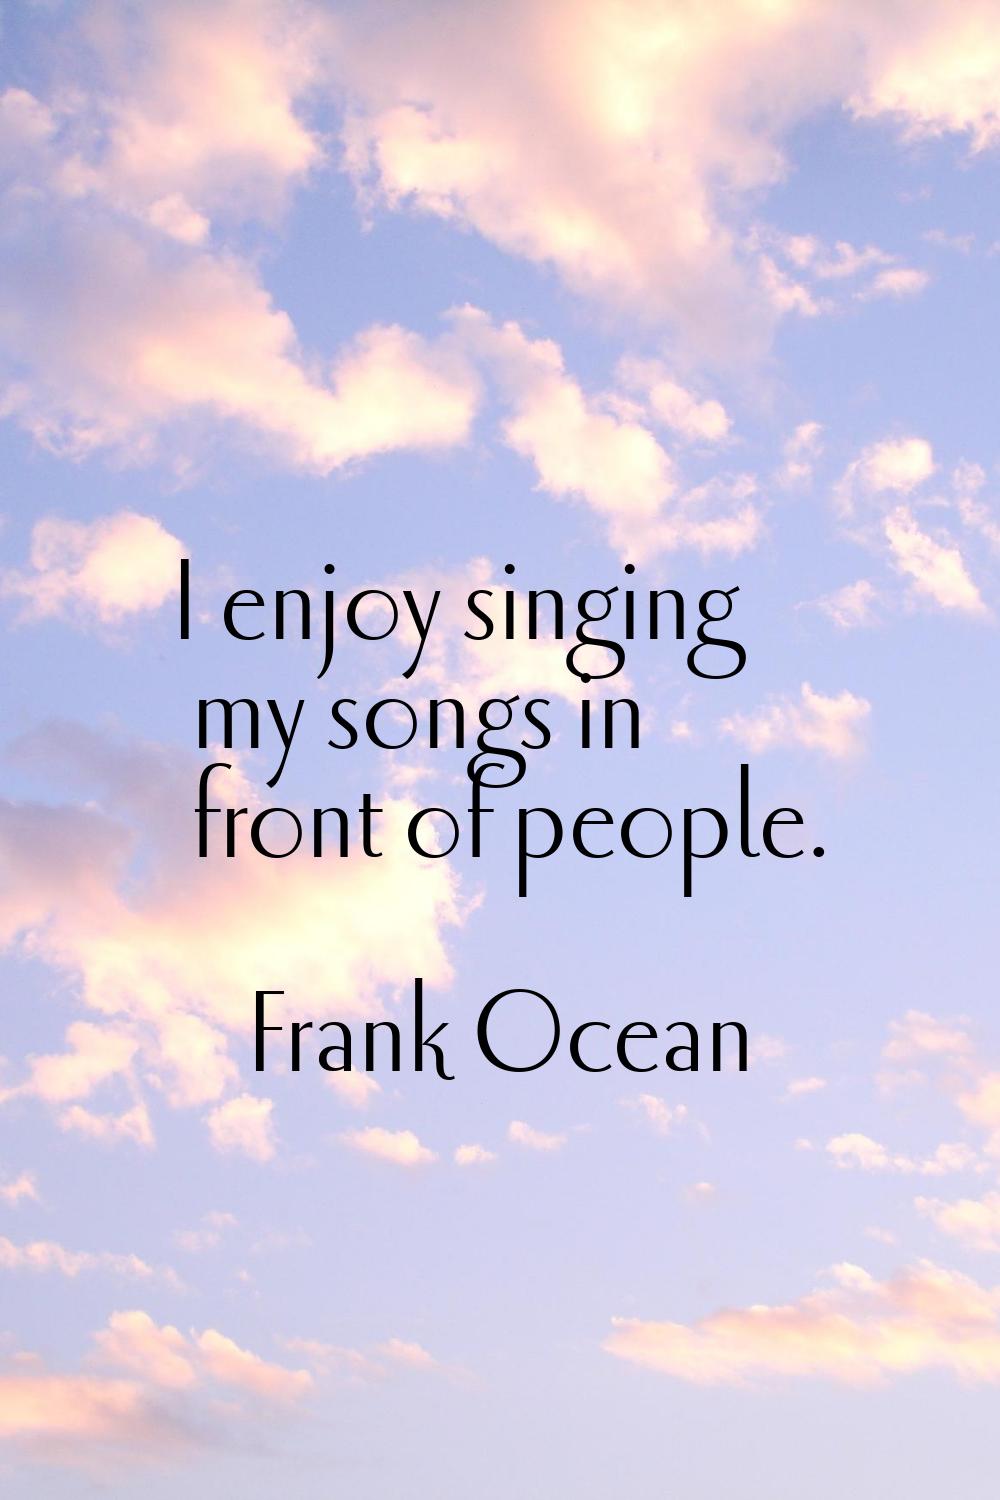 I enjoy singing my songs in front of people.